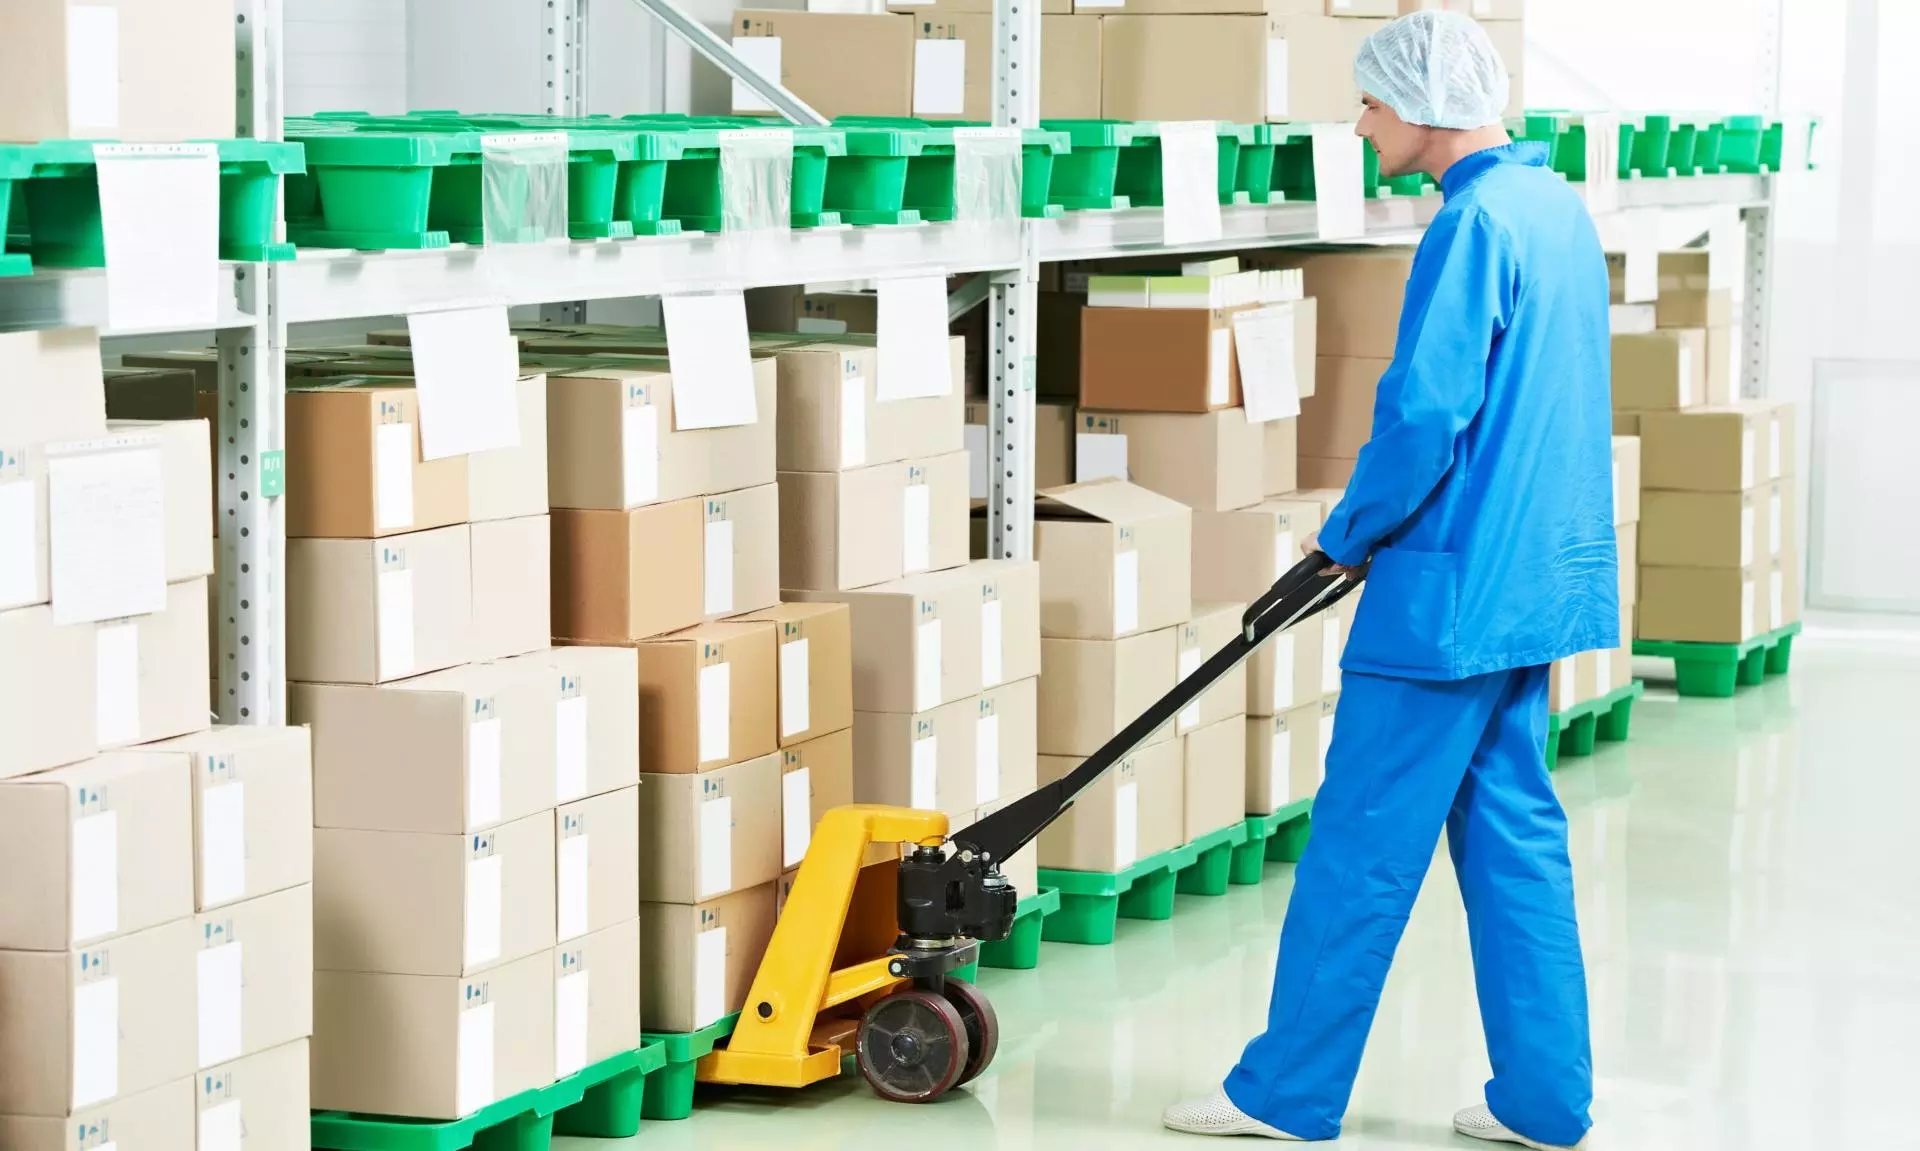 Ensuring smooth pharma logistics with safety and compliance standards